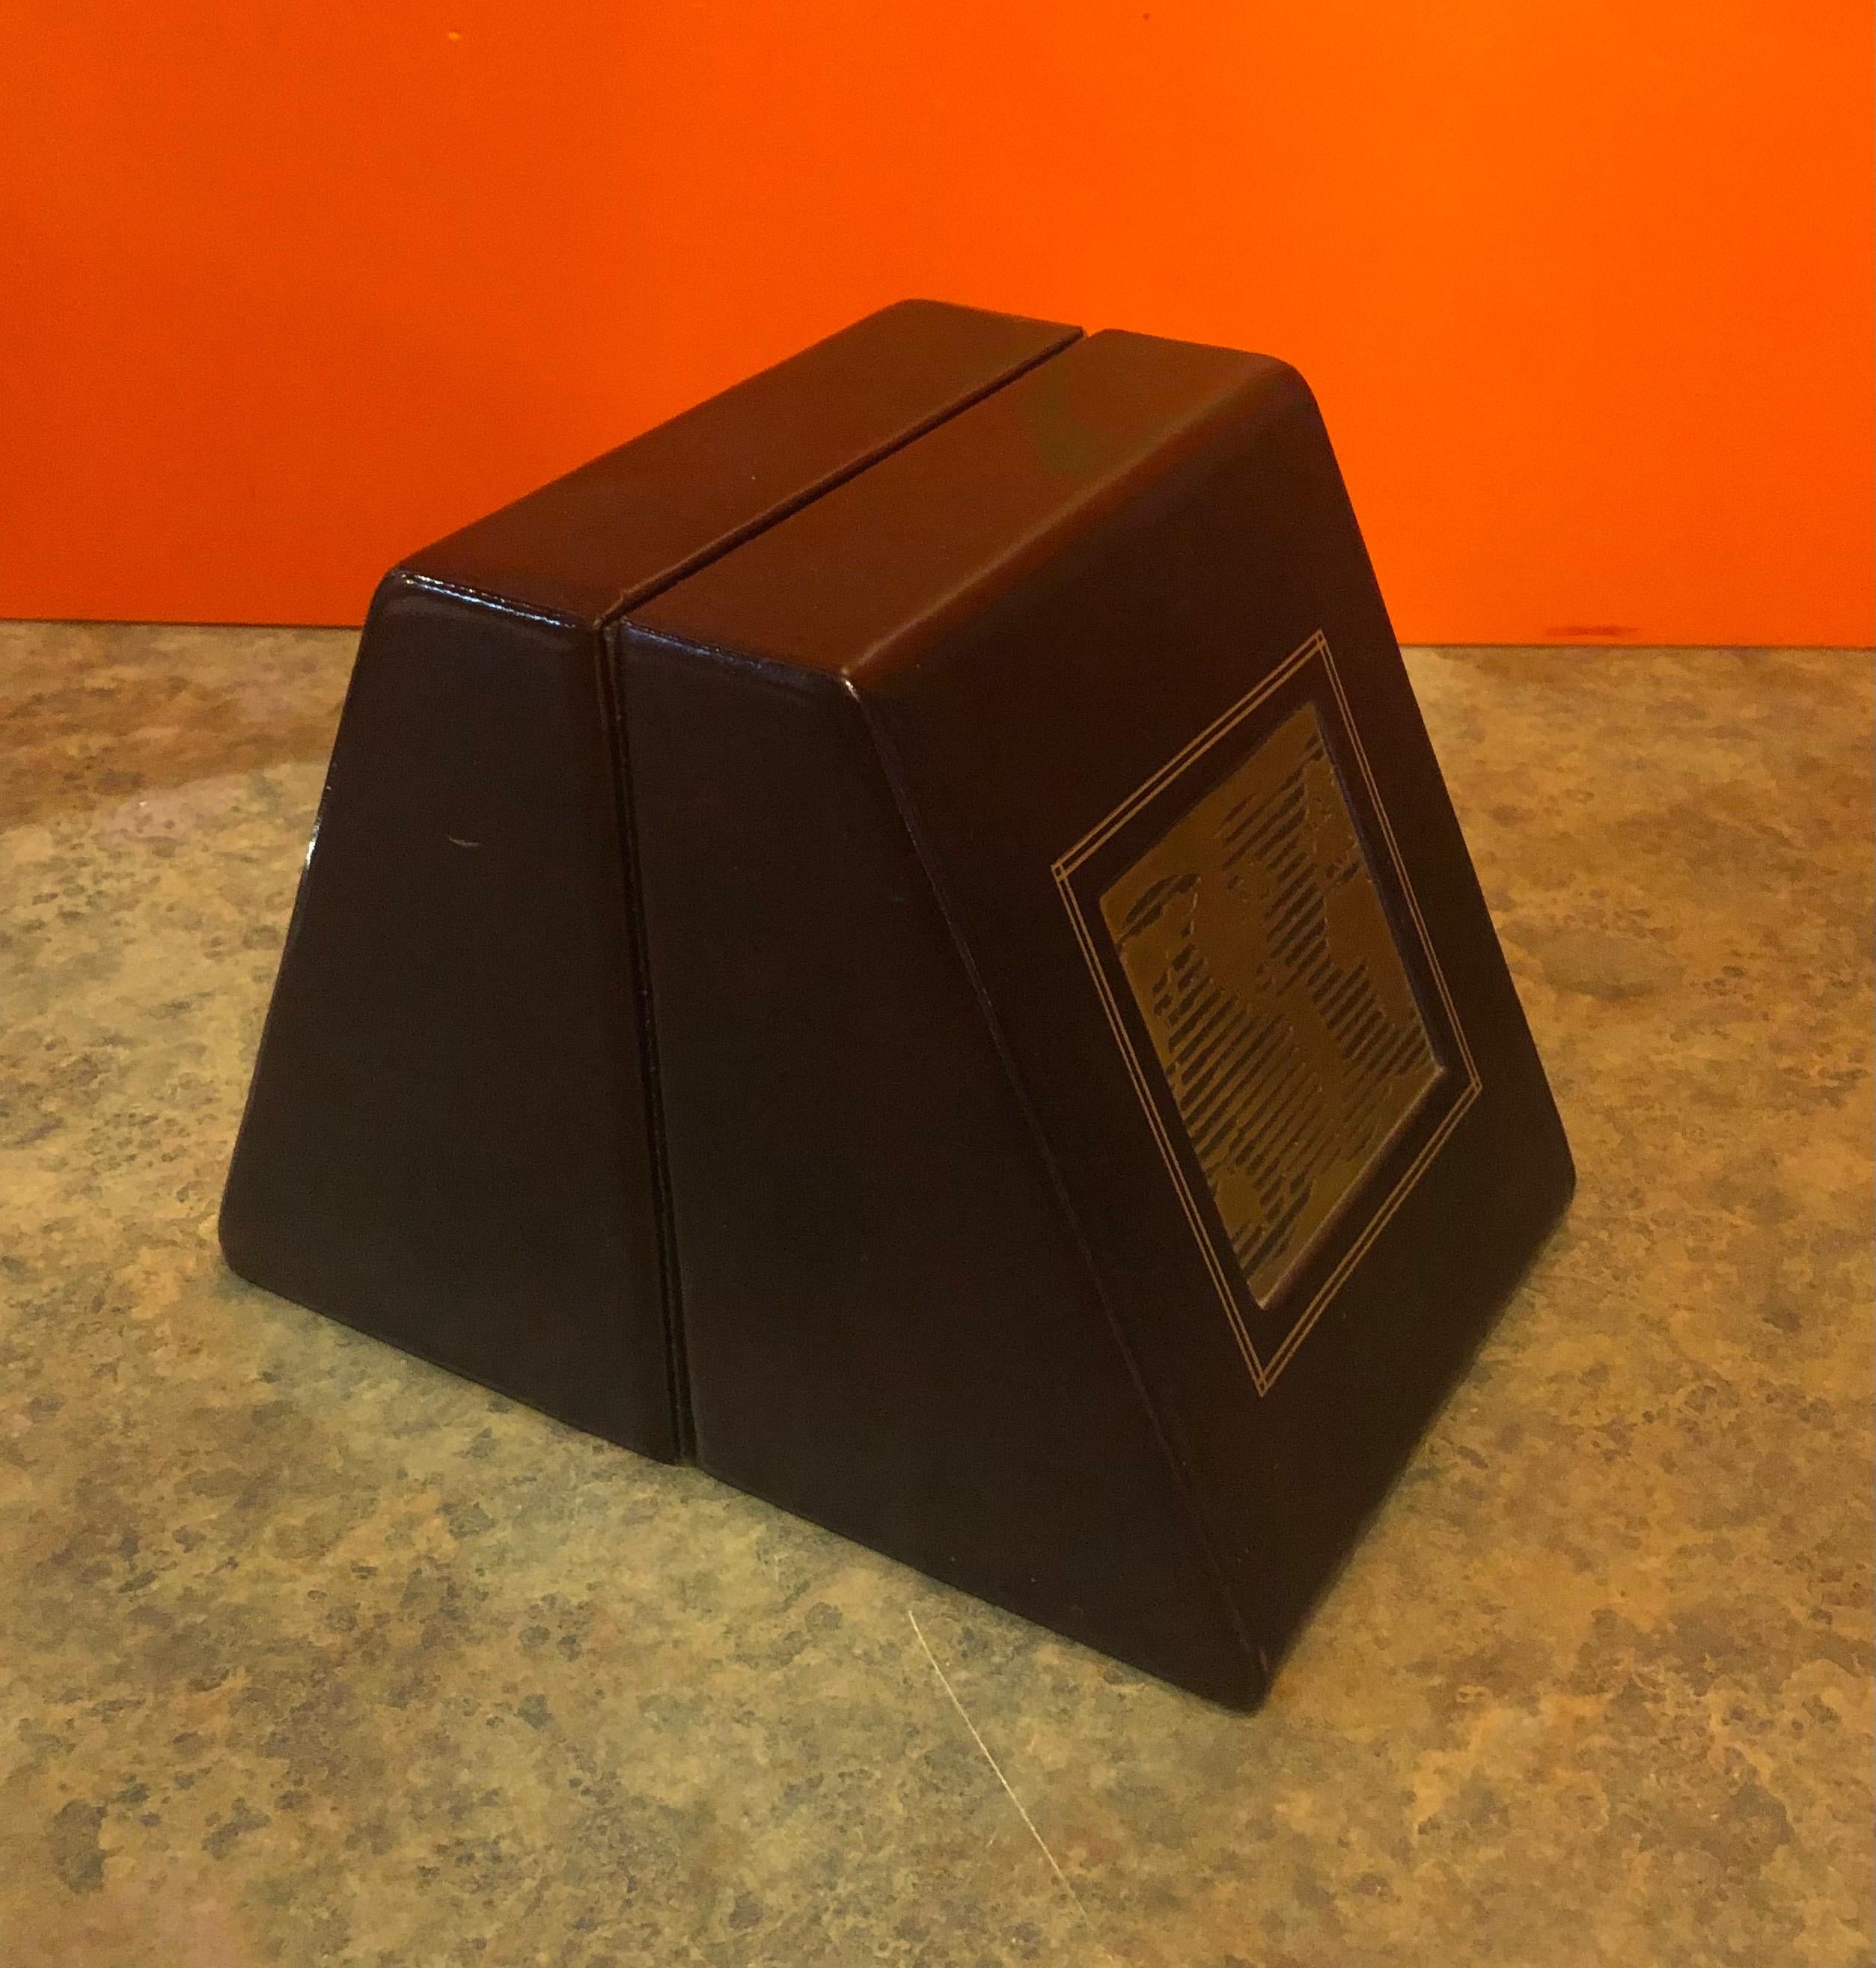 Classic pair of large leather wrapped bookends with a midcentury brass world map plaque embedded in the front, circa 1970s. The bookends measure 9